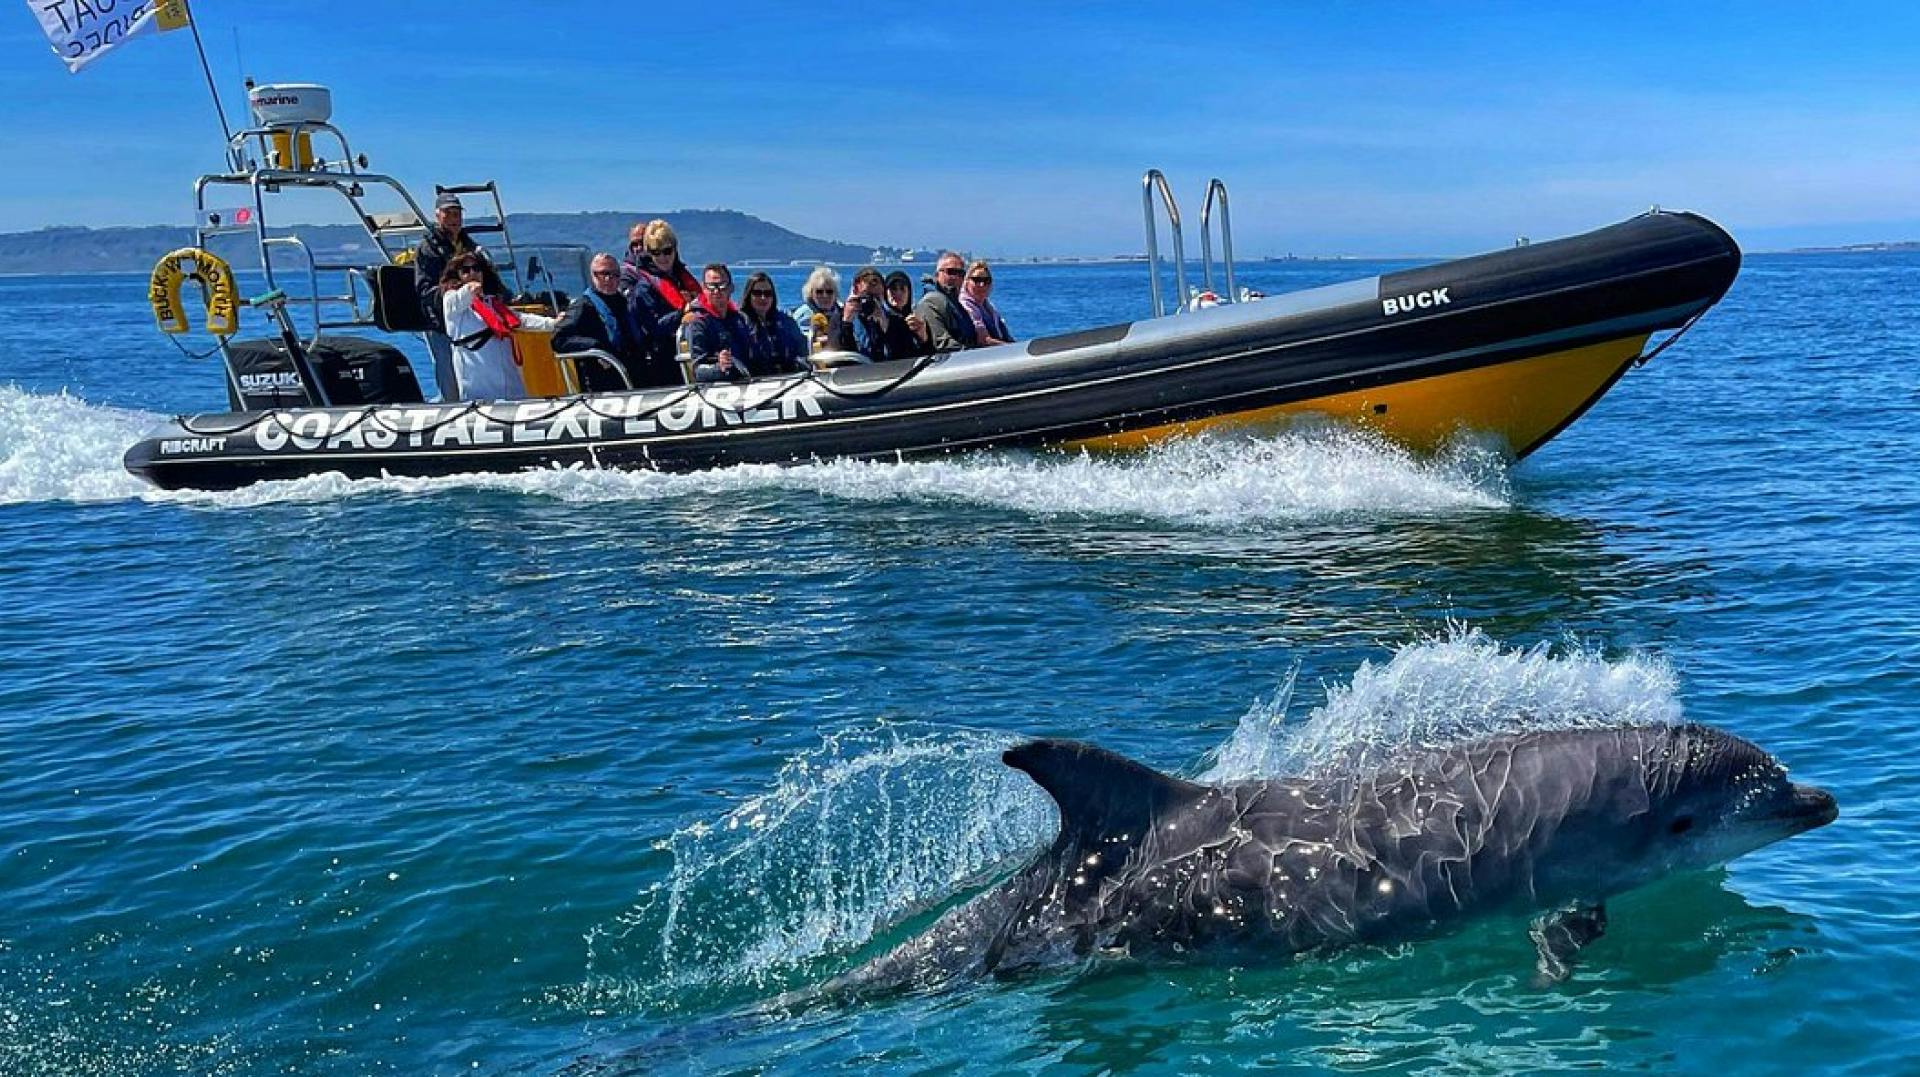 Rib Rides and Tours from Weymouth